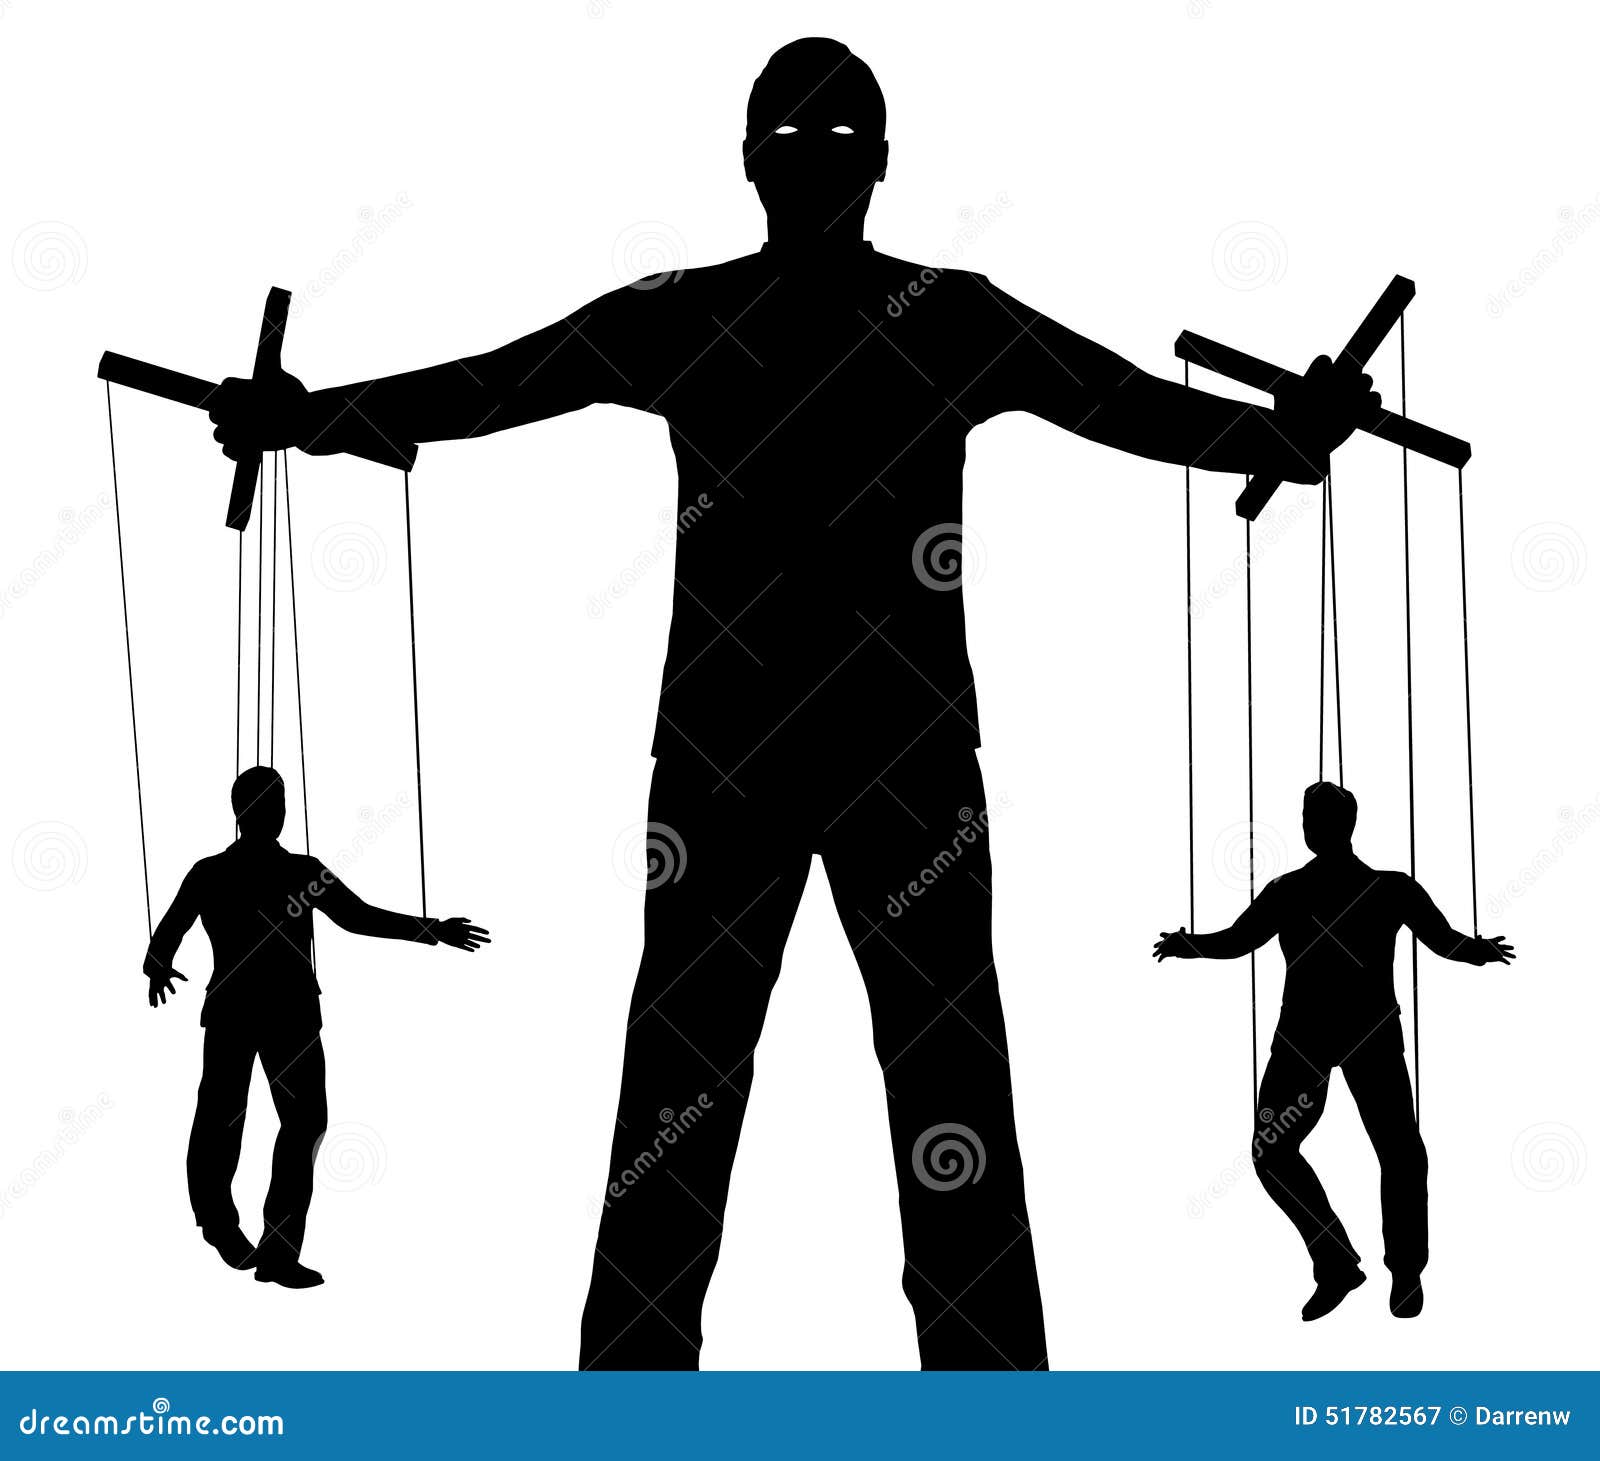 puppet-master-illustration-person-controlling-two-puppets-51782567.jpg